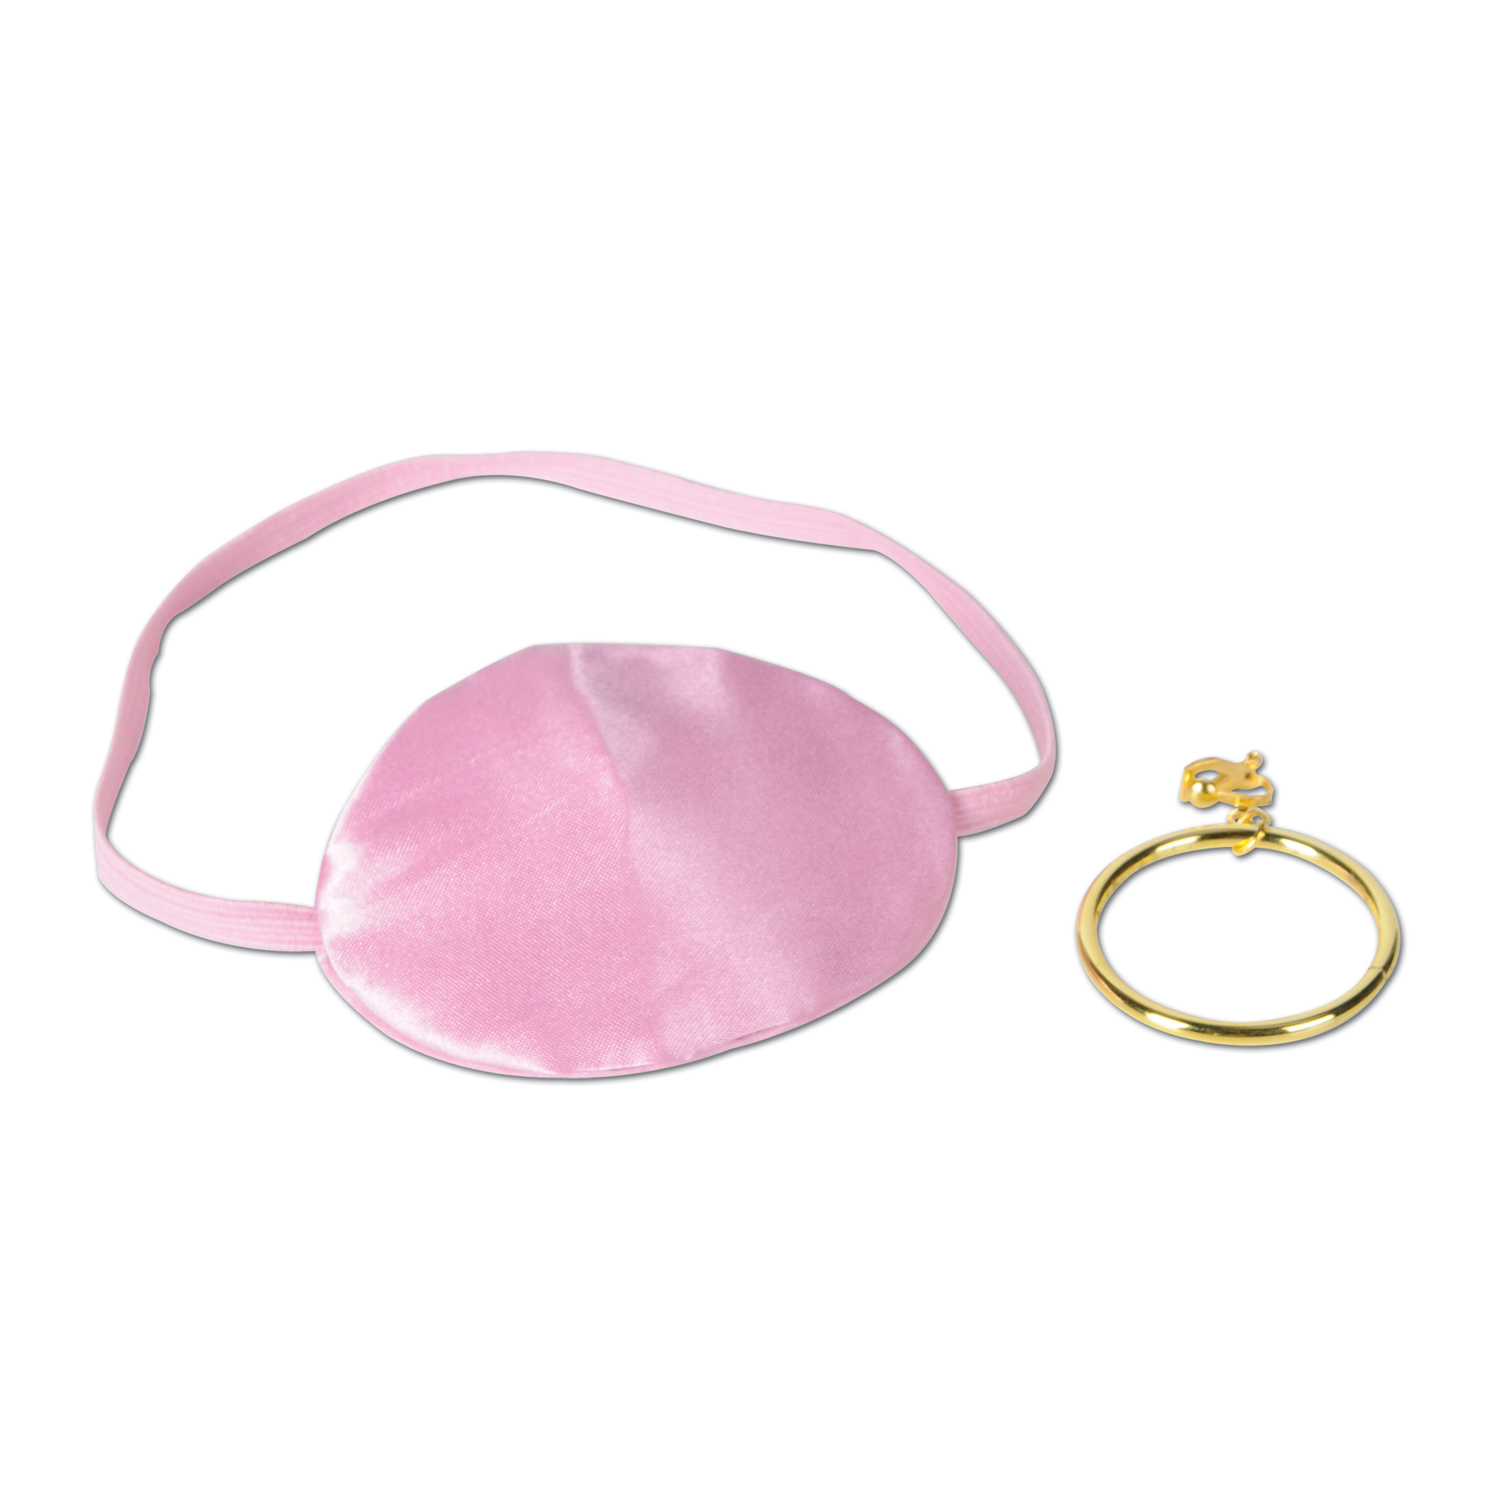 Pink Pirate Eye Patch w/Plastic EARRING